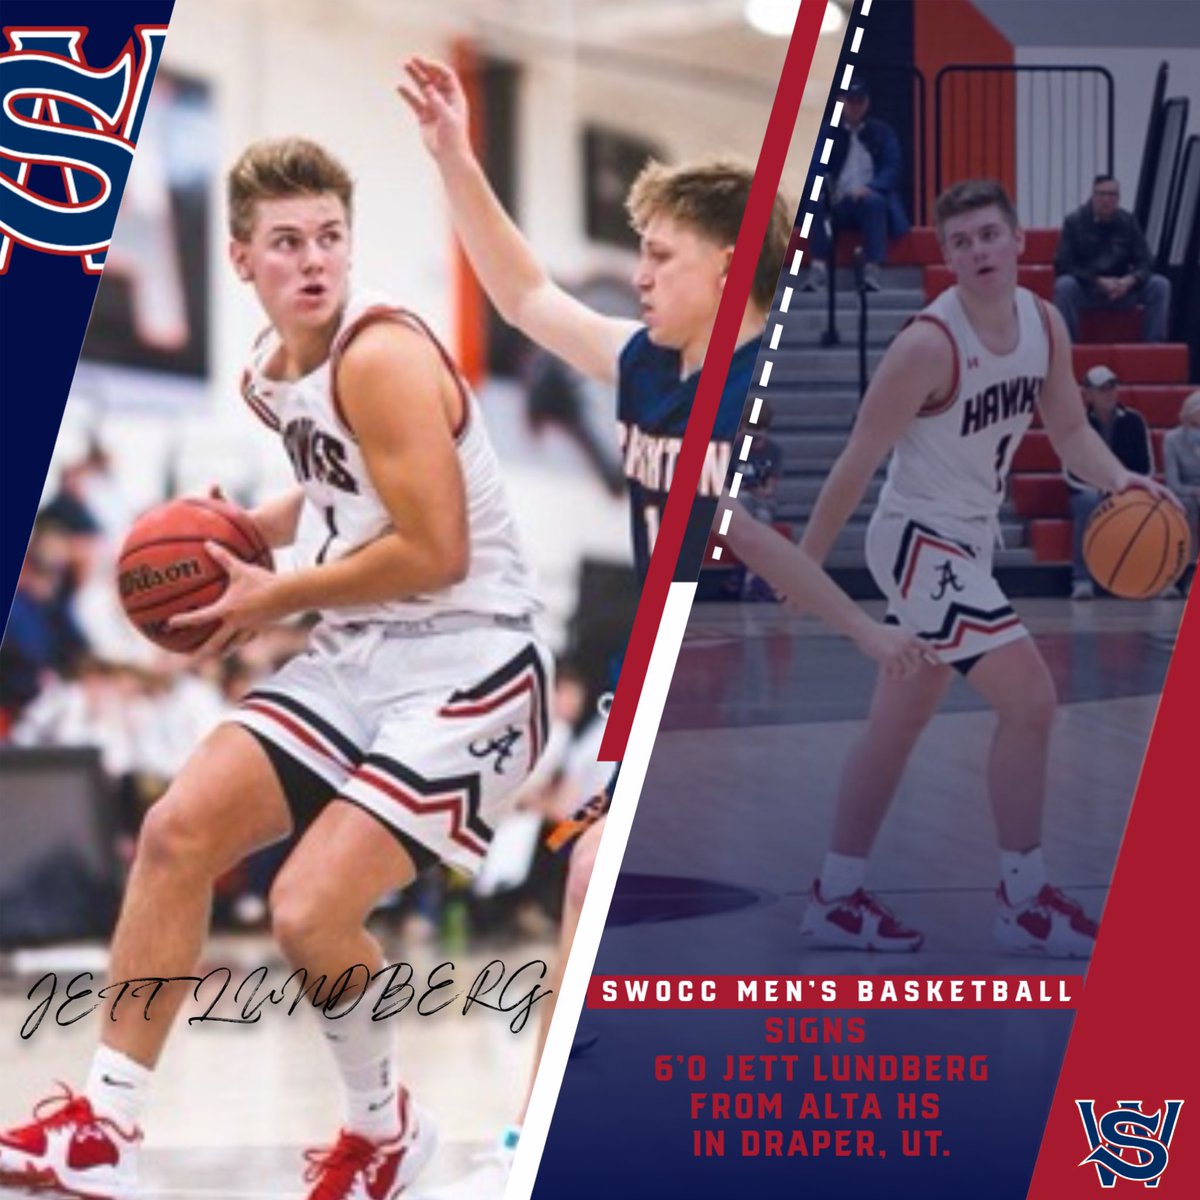 We are excited to announce the signing of 6’0 Guard Jett Lundberg from Alta HS in Draper UT. Jett was voted MVP of his conference and received 5A All State in High school. Jett will join us in the fall after getting home from his LDS mission in Argentina Buenos Aires!